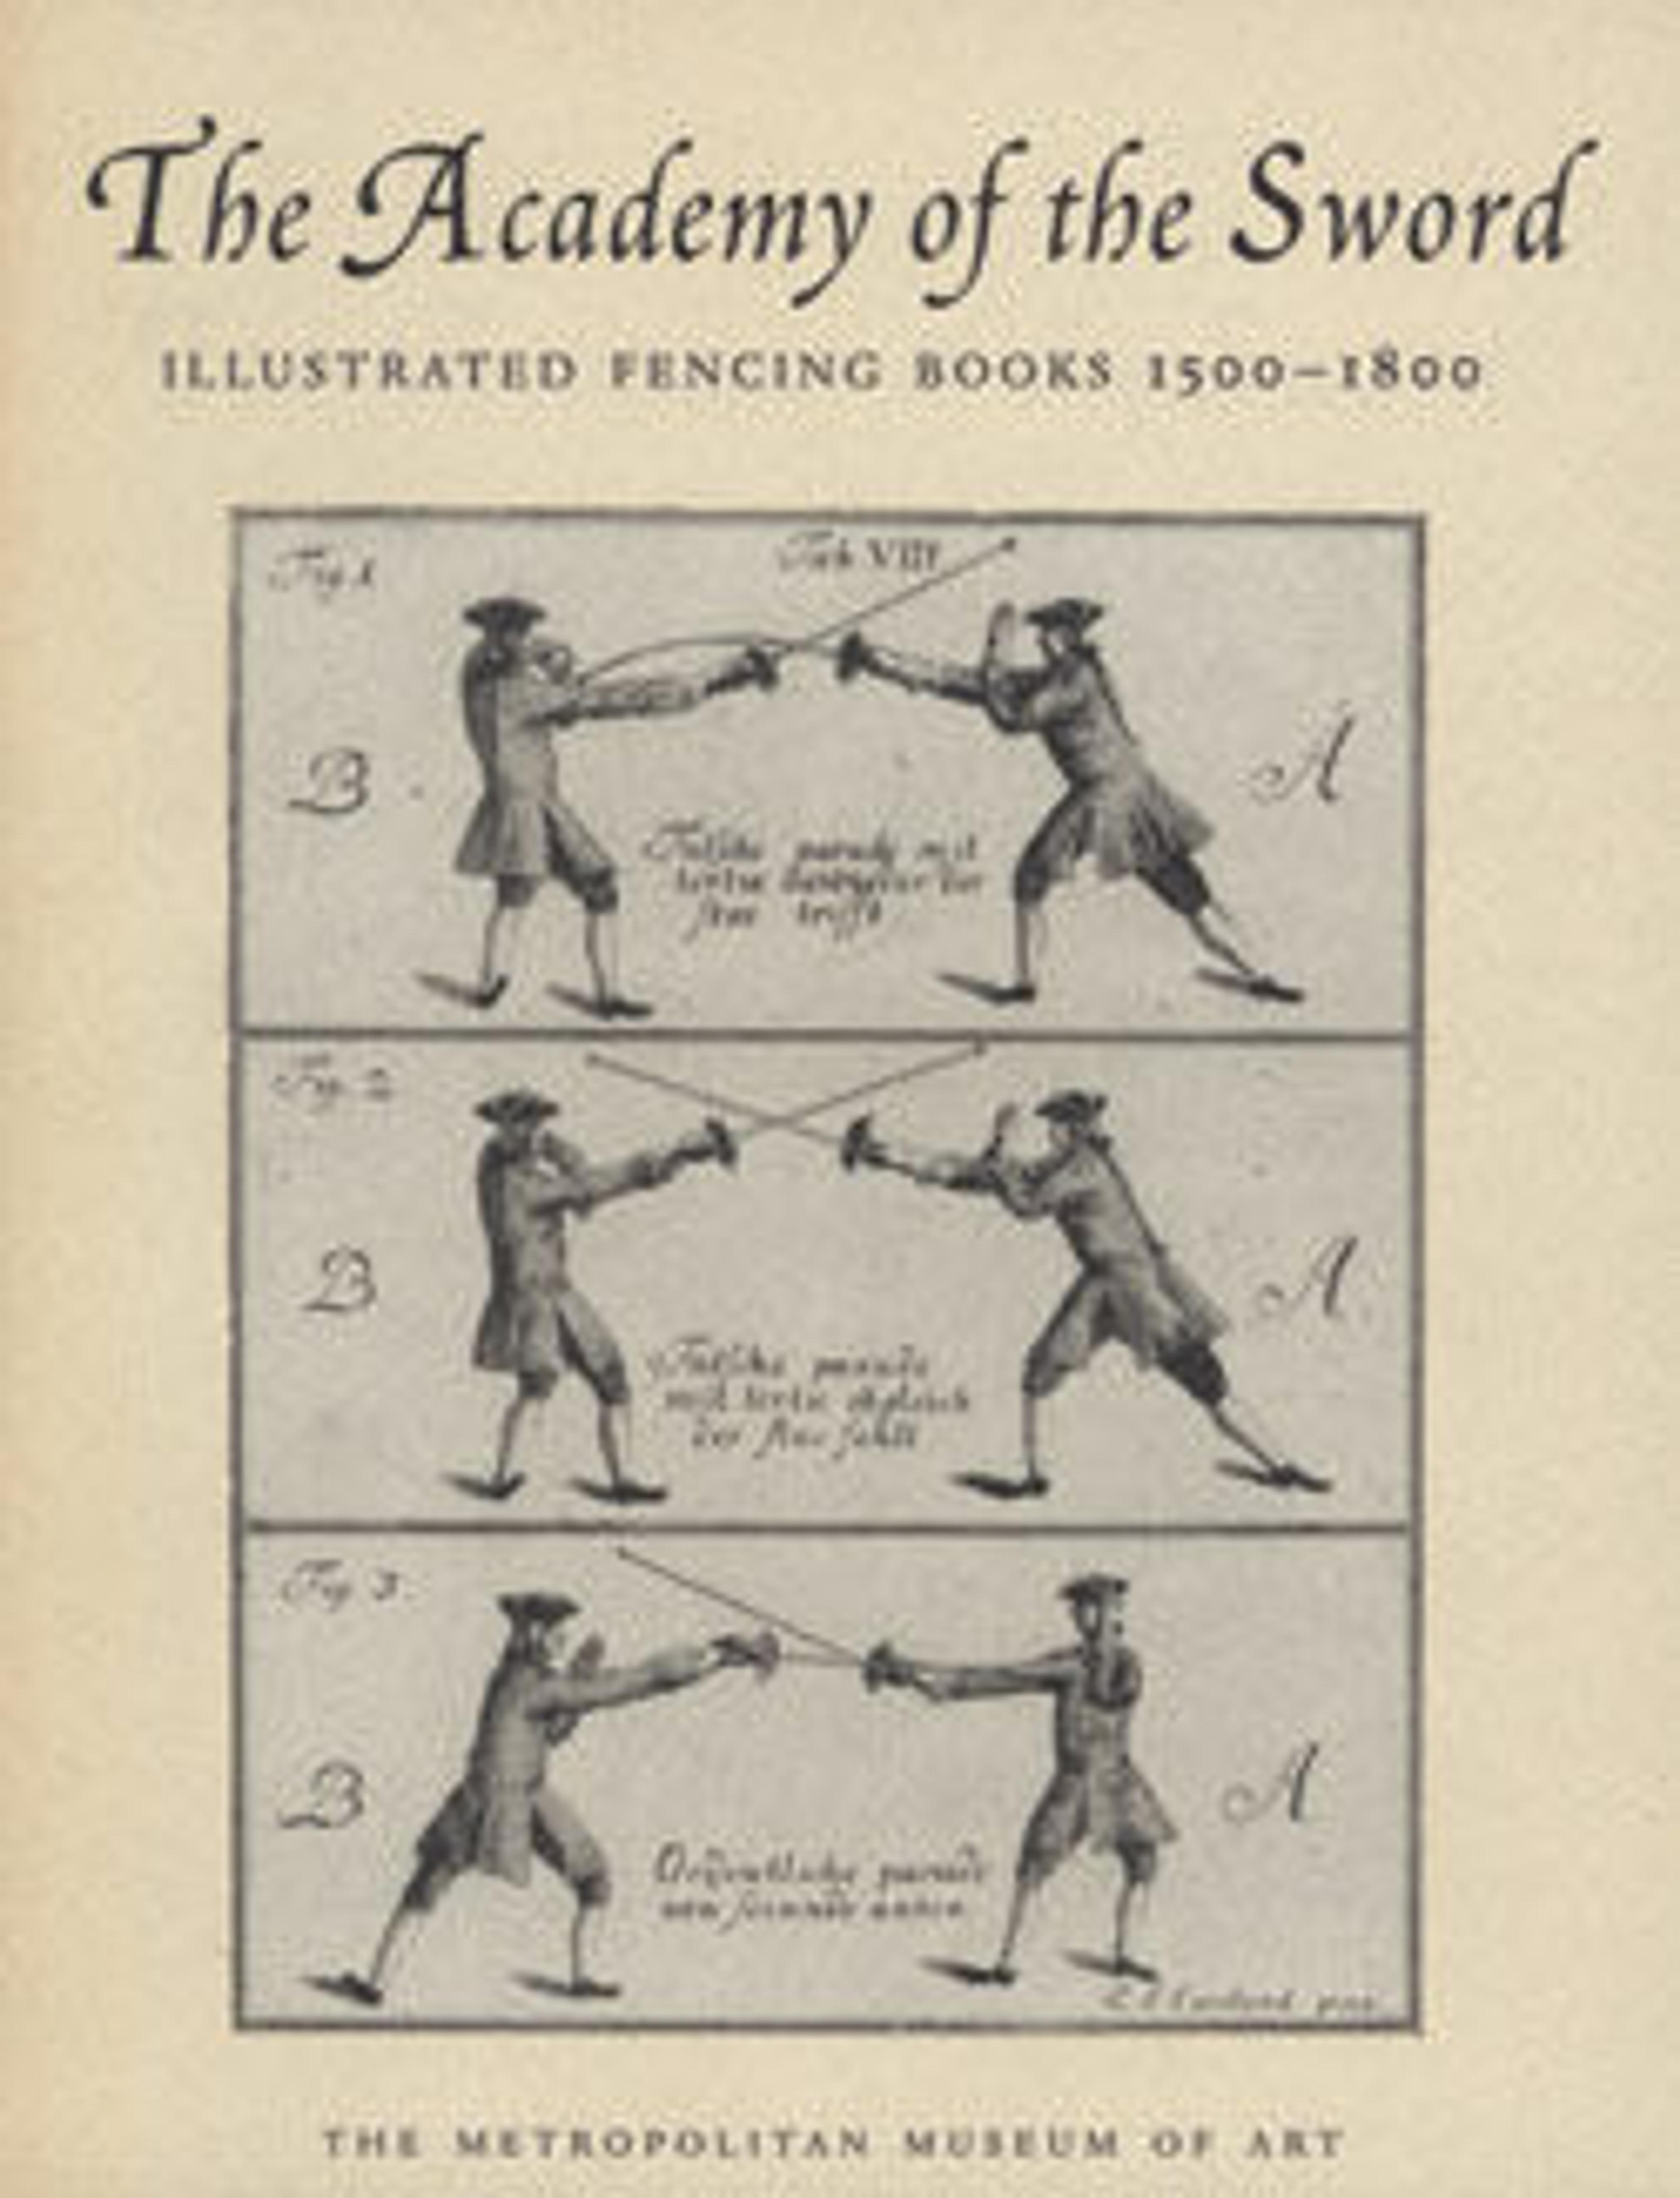 The Academy of the Sword: Illustrated Fencing Books 1500-1800